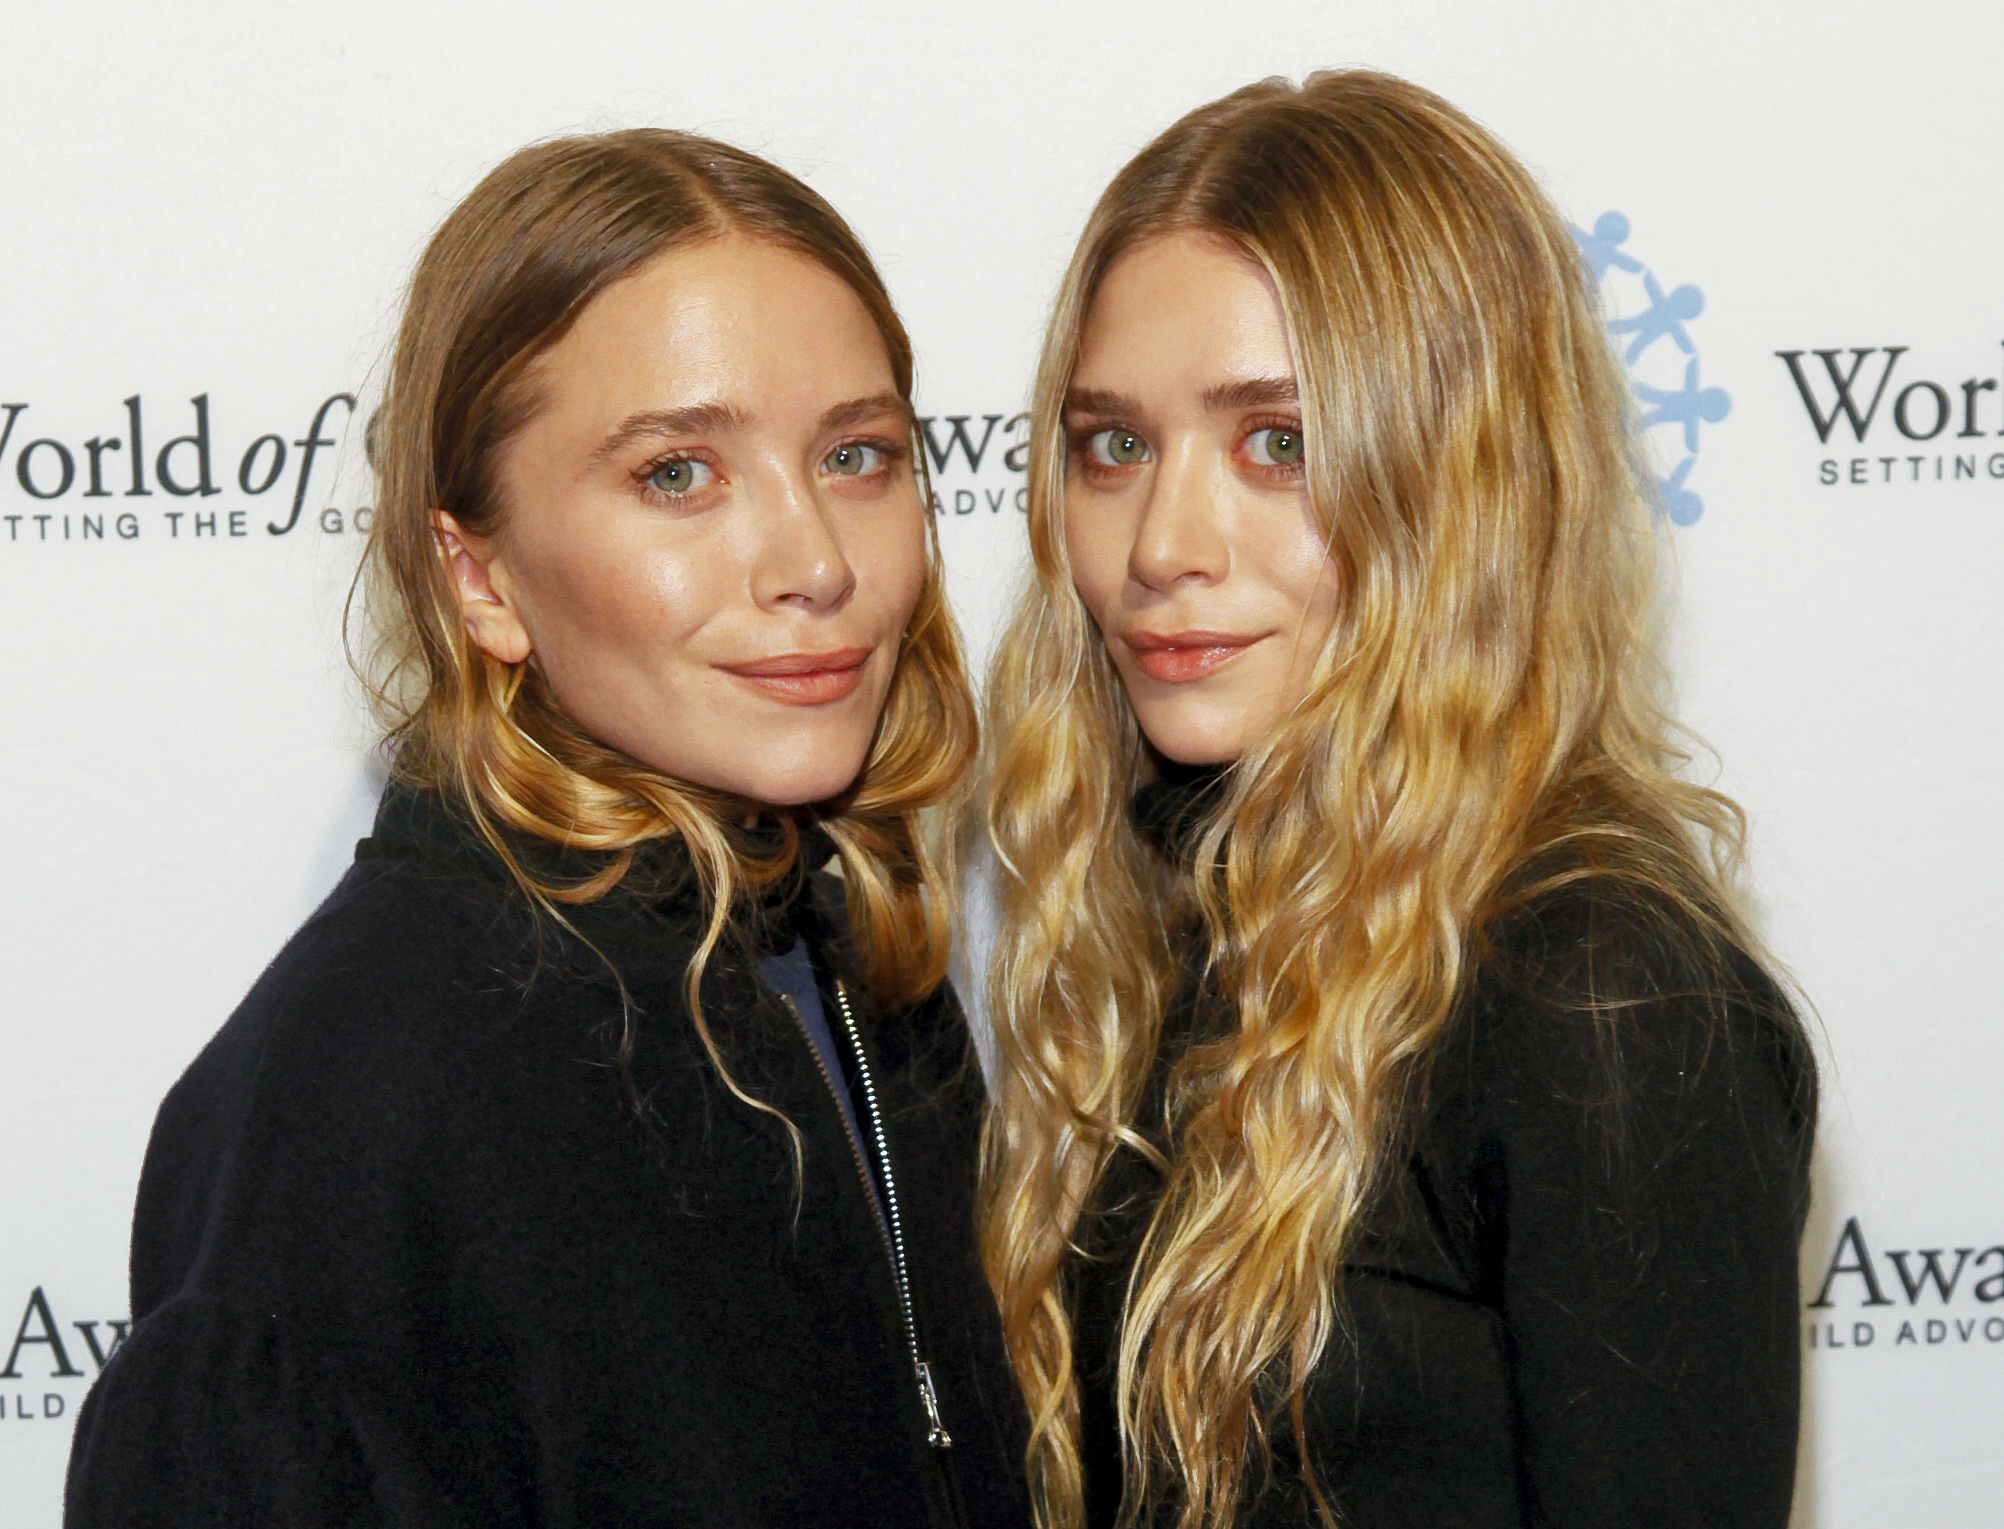 Olsen twins' company asked to pay up to $140K to interns